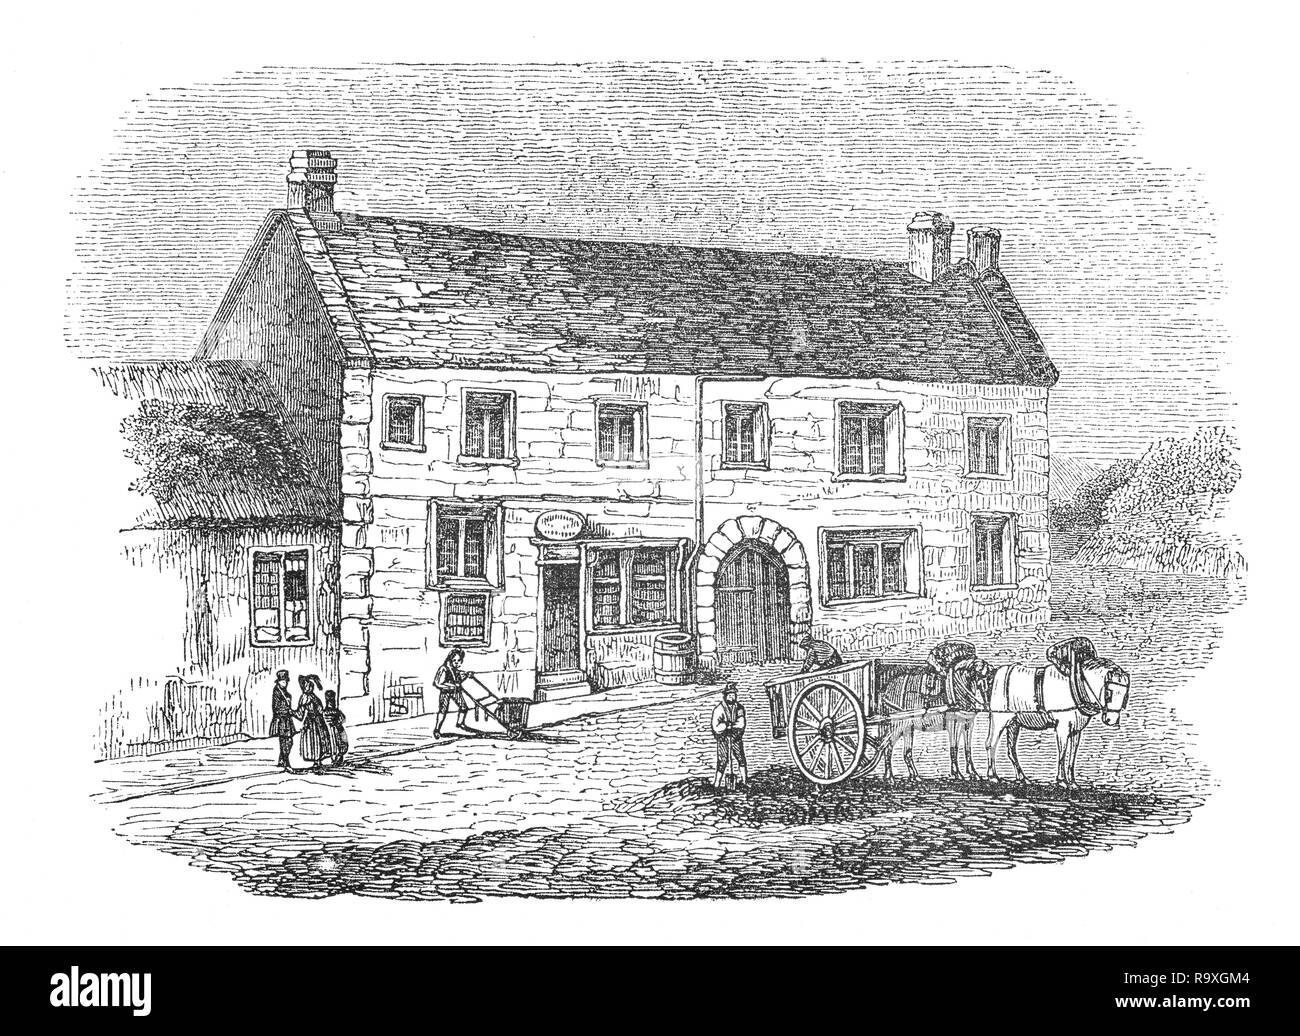 The inn at Charmouth in Dorset, England, now known as Abbots House, gave shelter to the disguised, fugitive King Charles II on 22 September 1651, when he came  looking for a boat to take him to France following defeat at the Battle of Worcester. A small trading ship bound for St Malo was found, and the master, Stephen Limbry, agreed to pick up the King from Charmouth beach and transport him to the ship, but just two hours before the pick up Limbry told his wife, who locked him in his room and stole his clothes to ensure he would not become involved. The following day Charles left Charmouth. Stock Photo